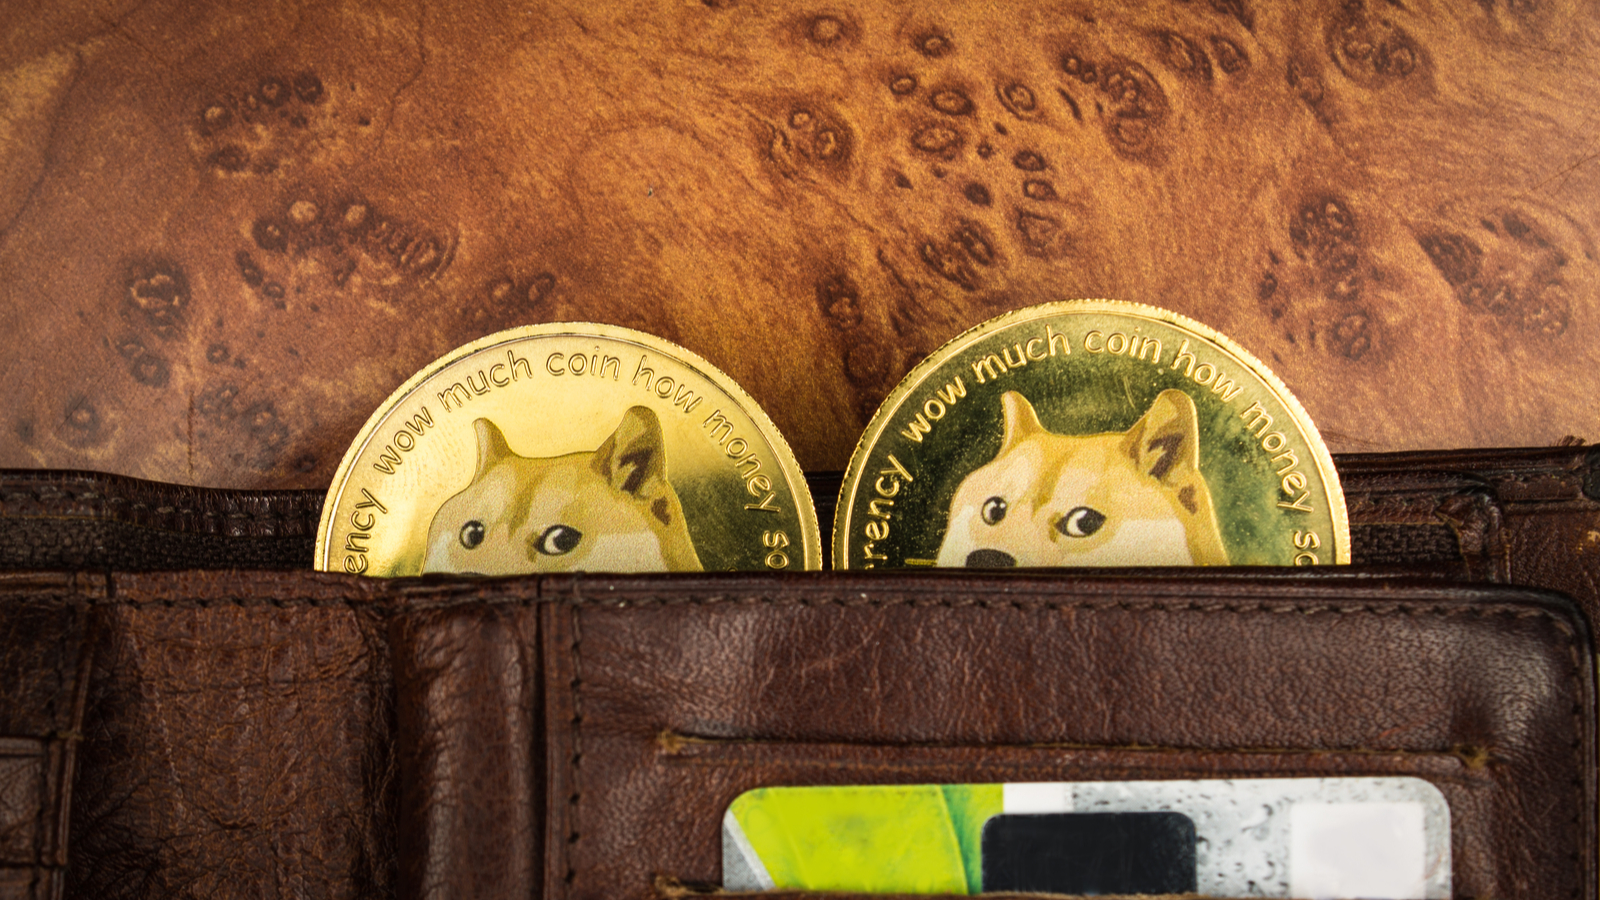 Dogecoin Price Predictions. Dogecoin coins with doge faces peeking out of brown leather wallet. The coins have the words "wow much coin how money" embossed on them.